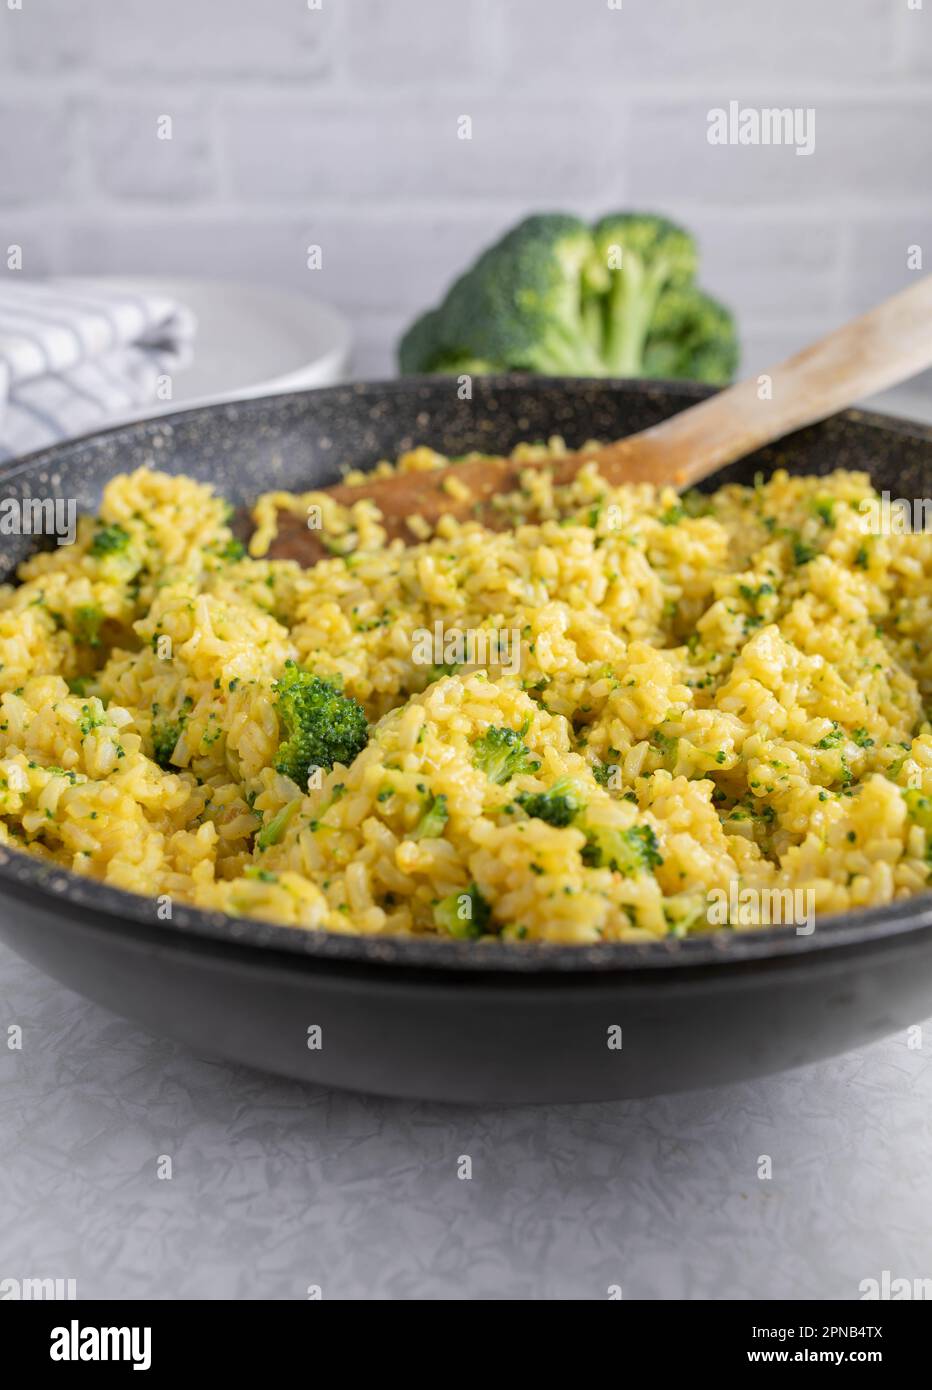 Curried brown rice with broccoli in a skillet Stock Photo